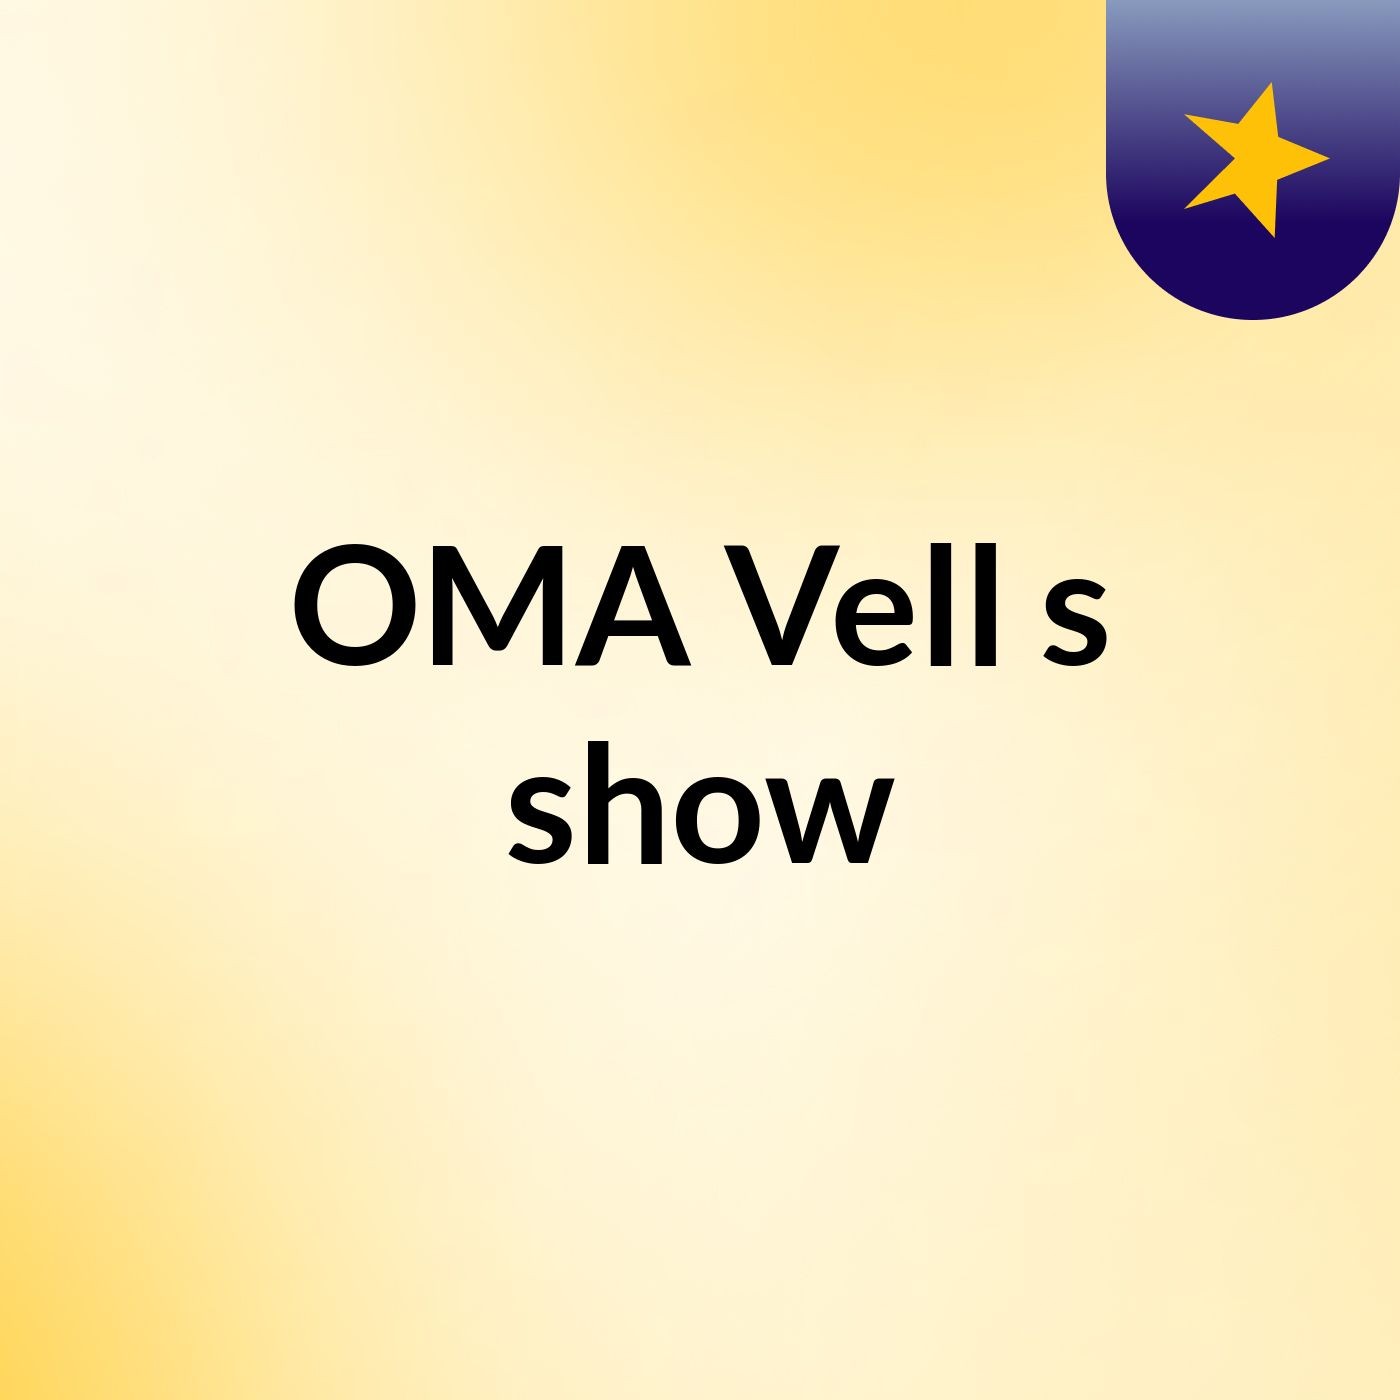 OMA Vell's show